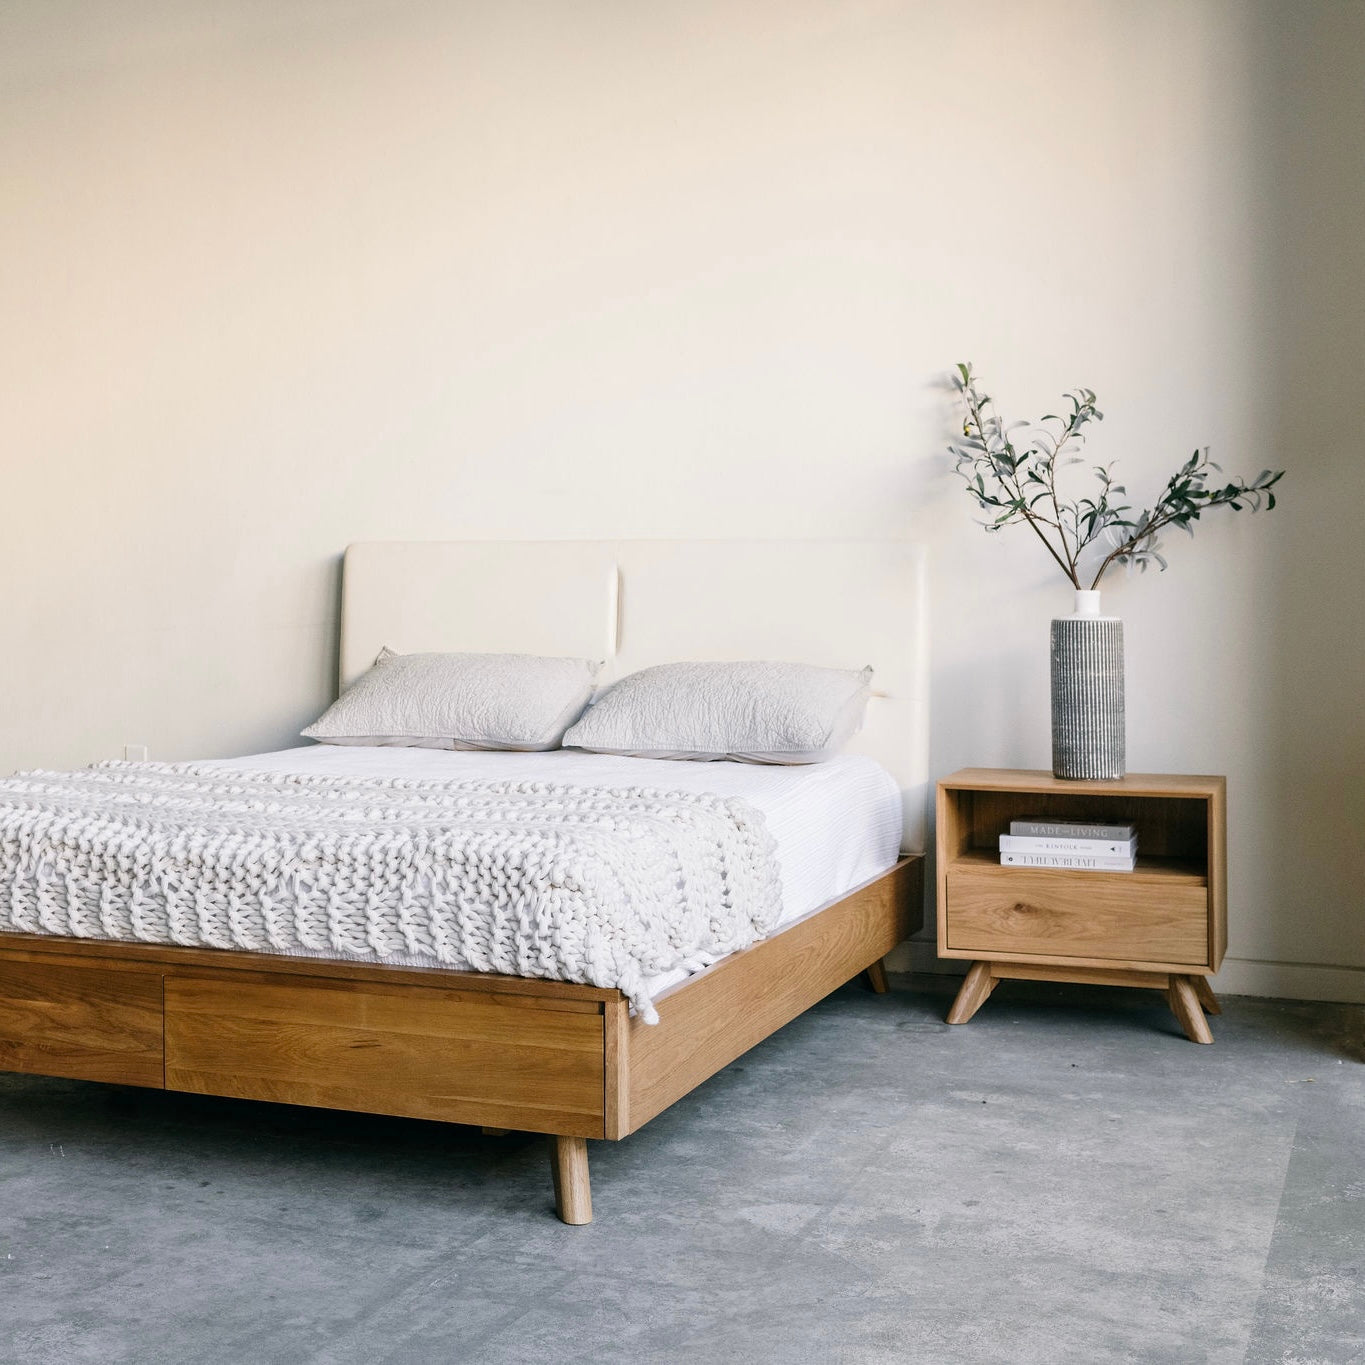 Mim Concept best Modern furniture stores in Toronto, Ottawa and Mississauga to sell modern contemporary bedroom furniture and condo furniture Italian leather headboard bed Low profile platform storage bed solid oak wood modern organic